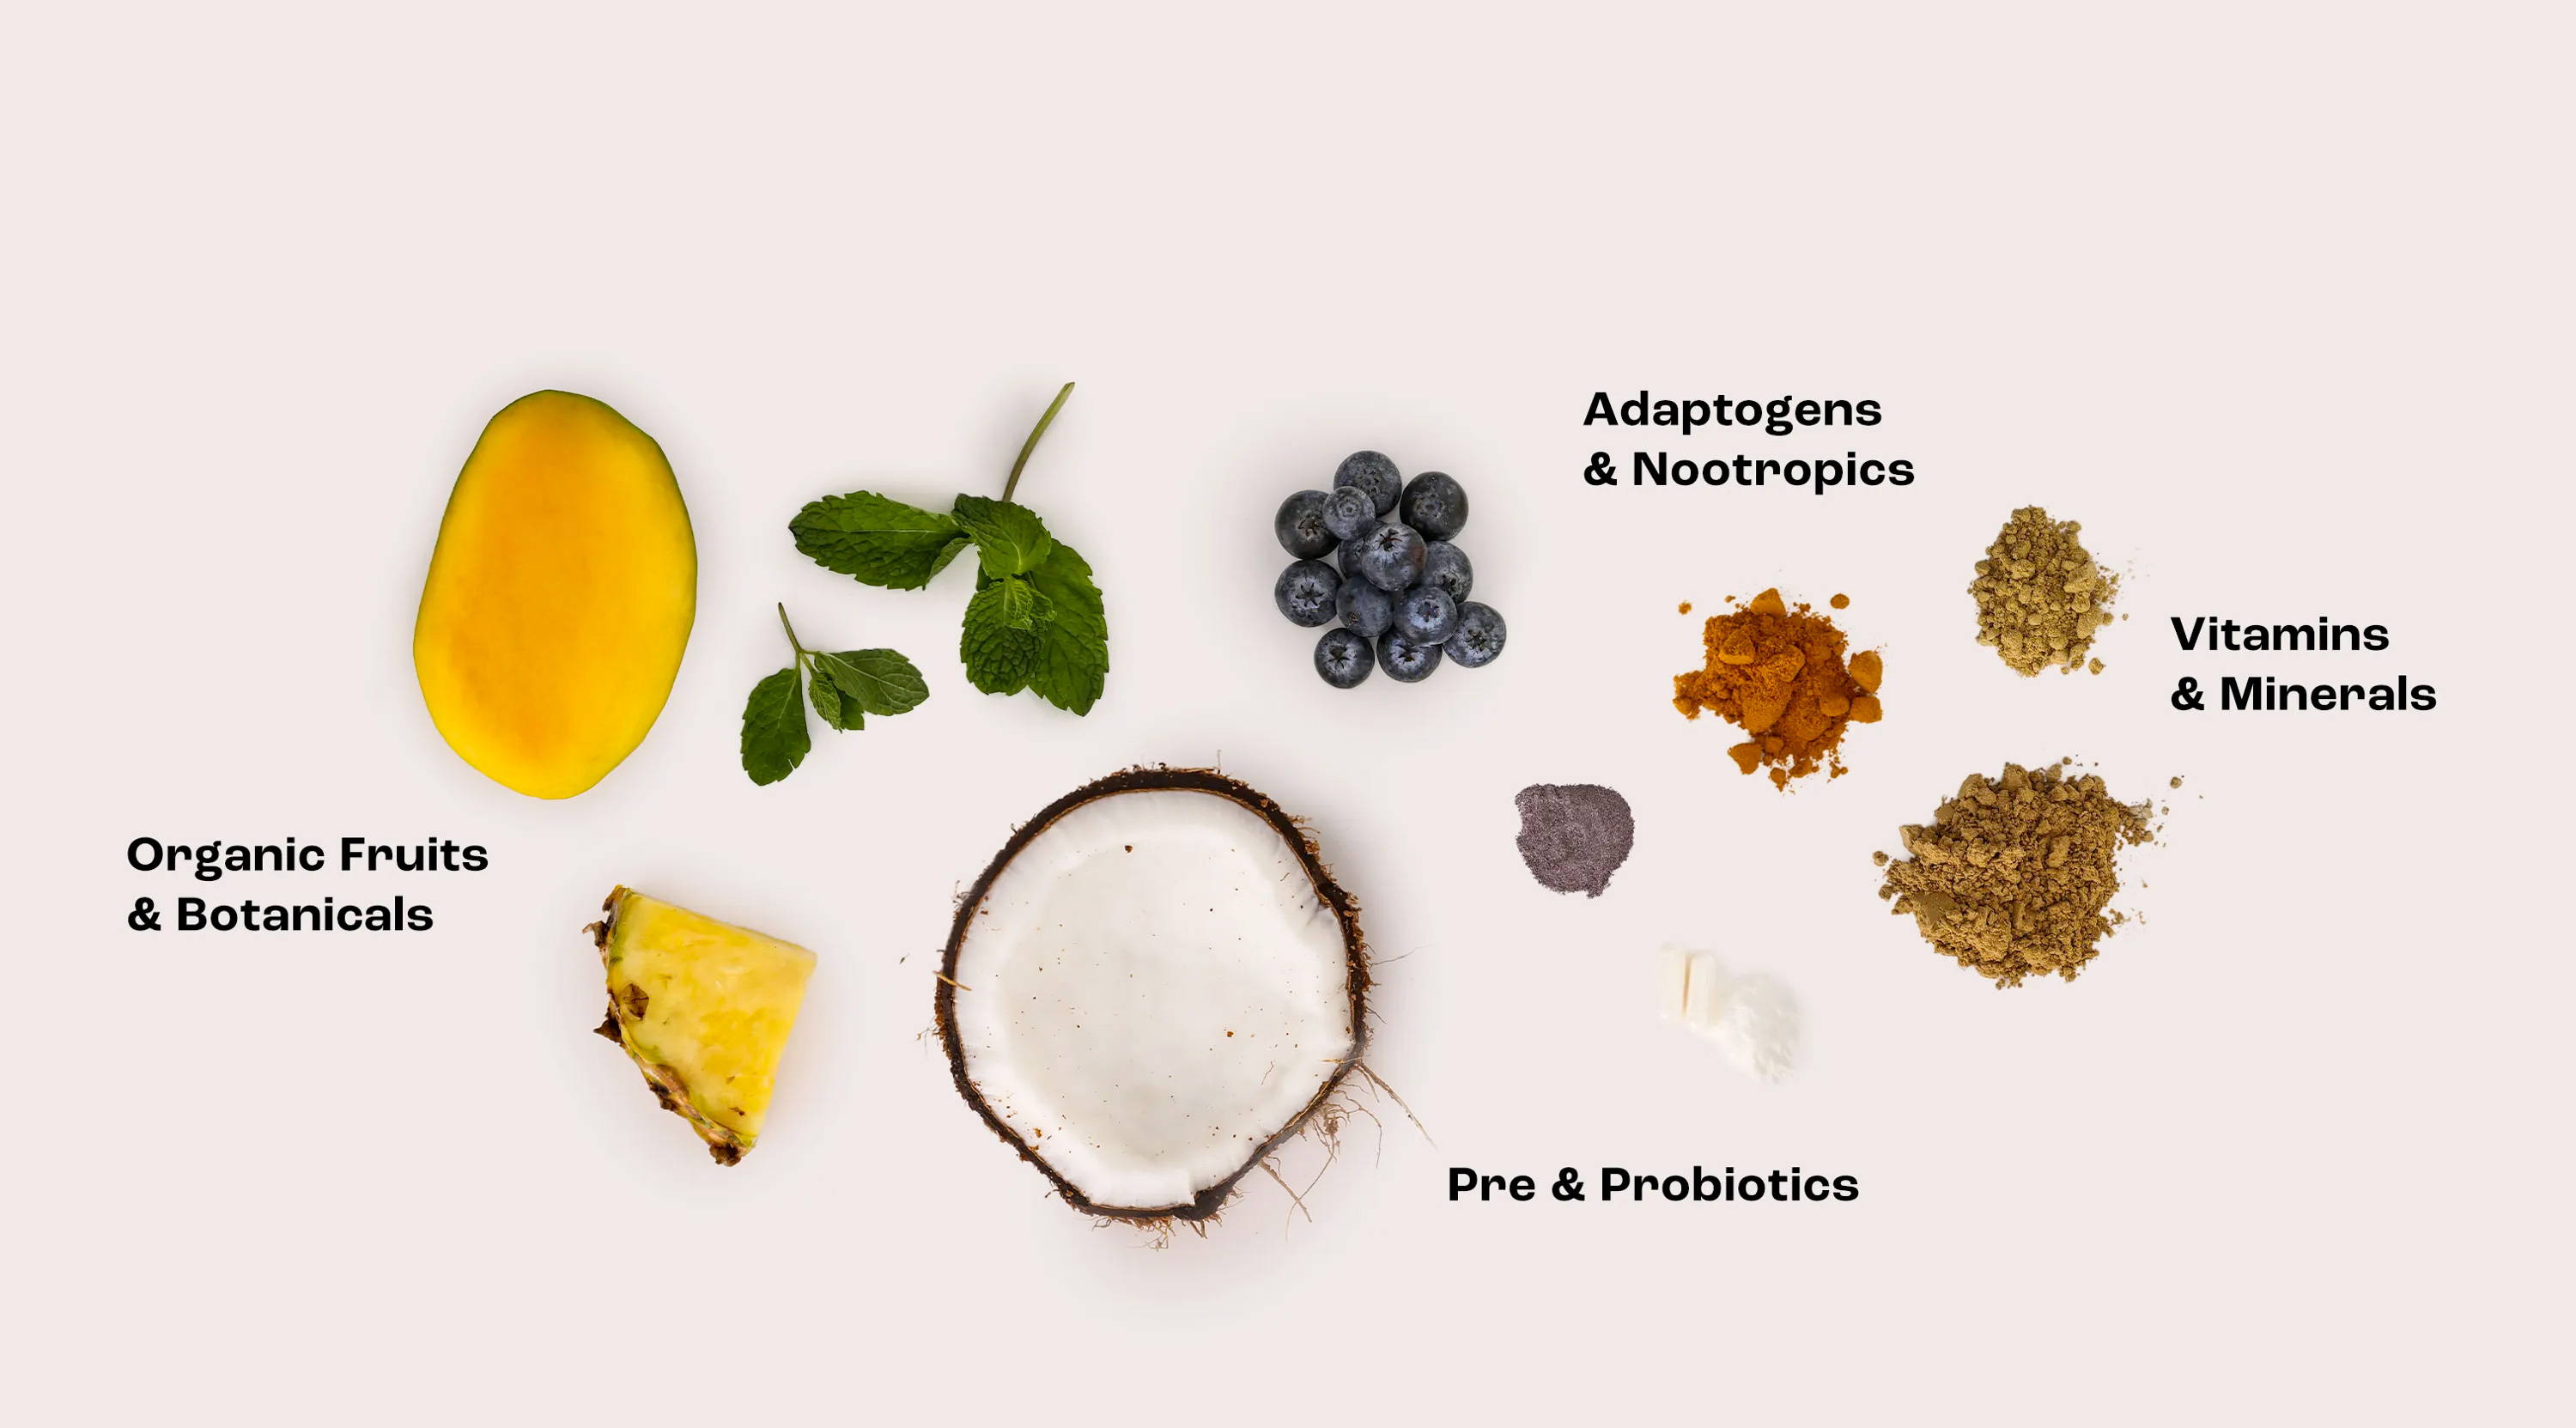 Ingredients for Wellness